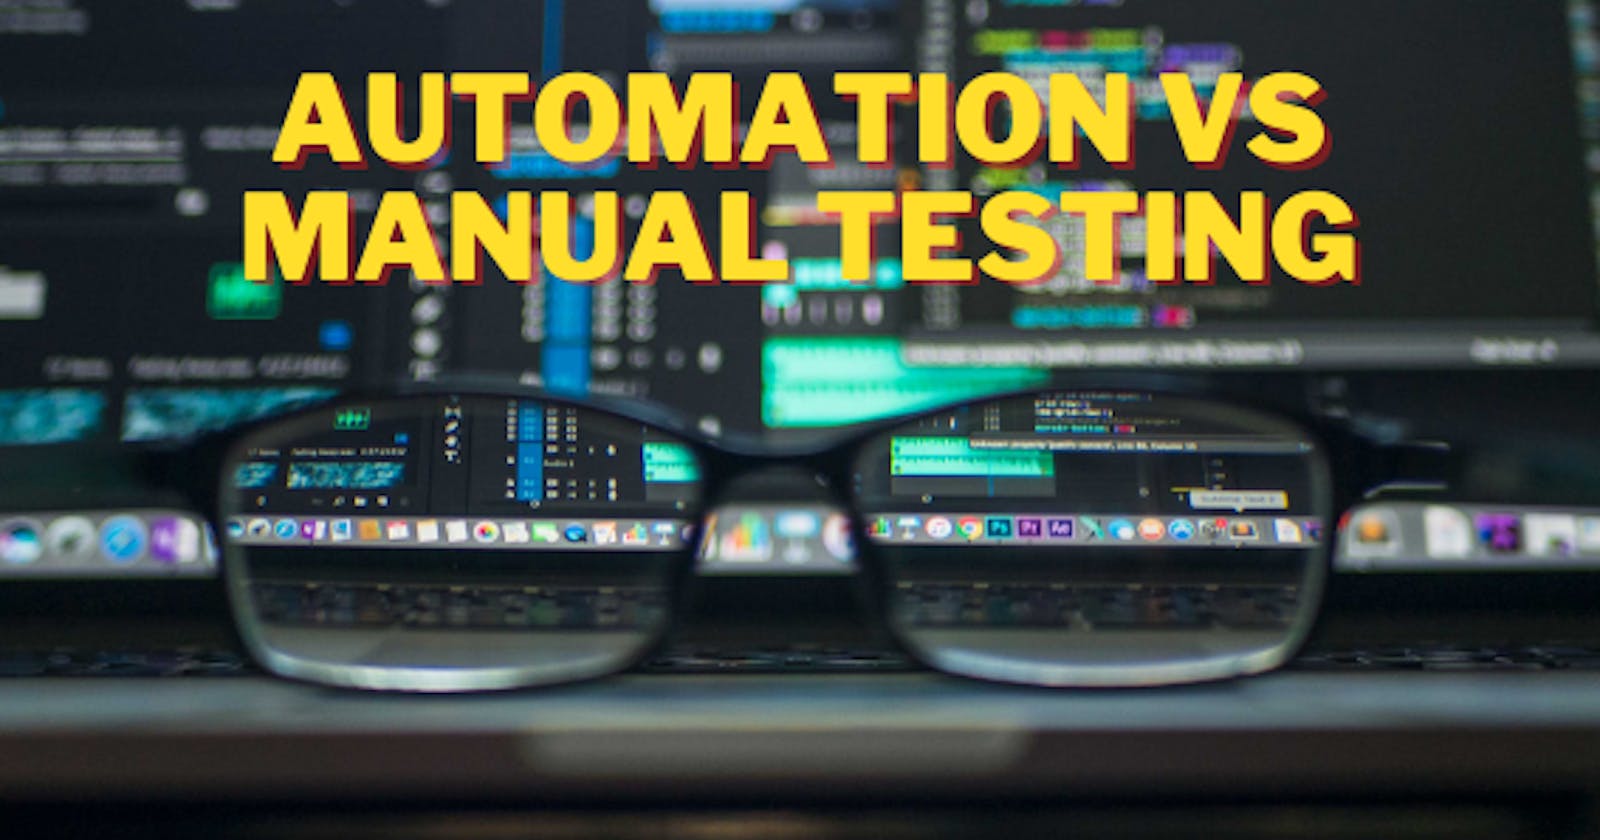 Difference between Manual and Automation Testing